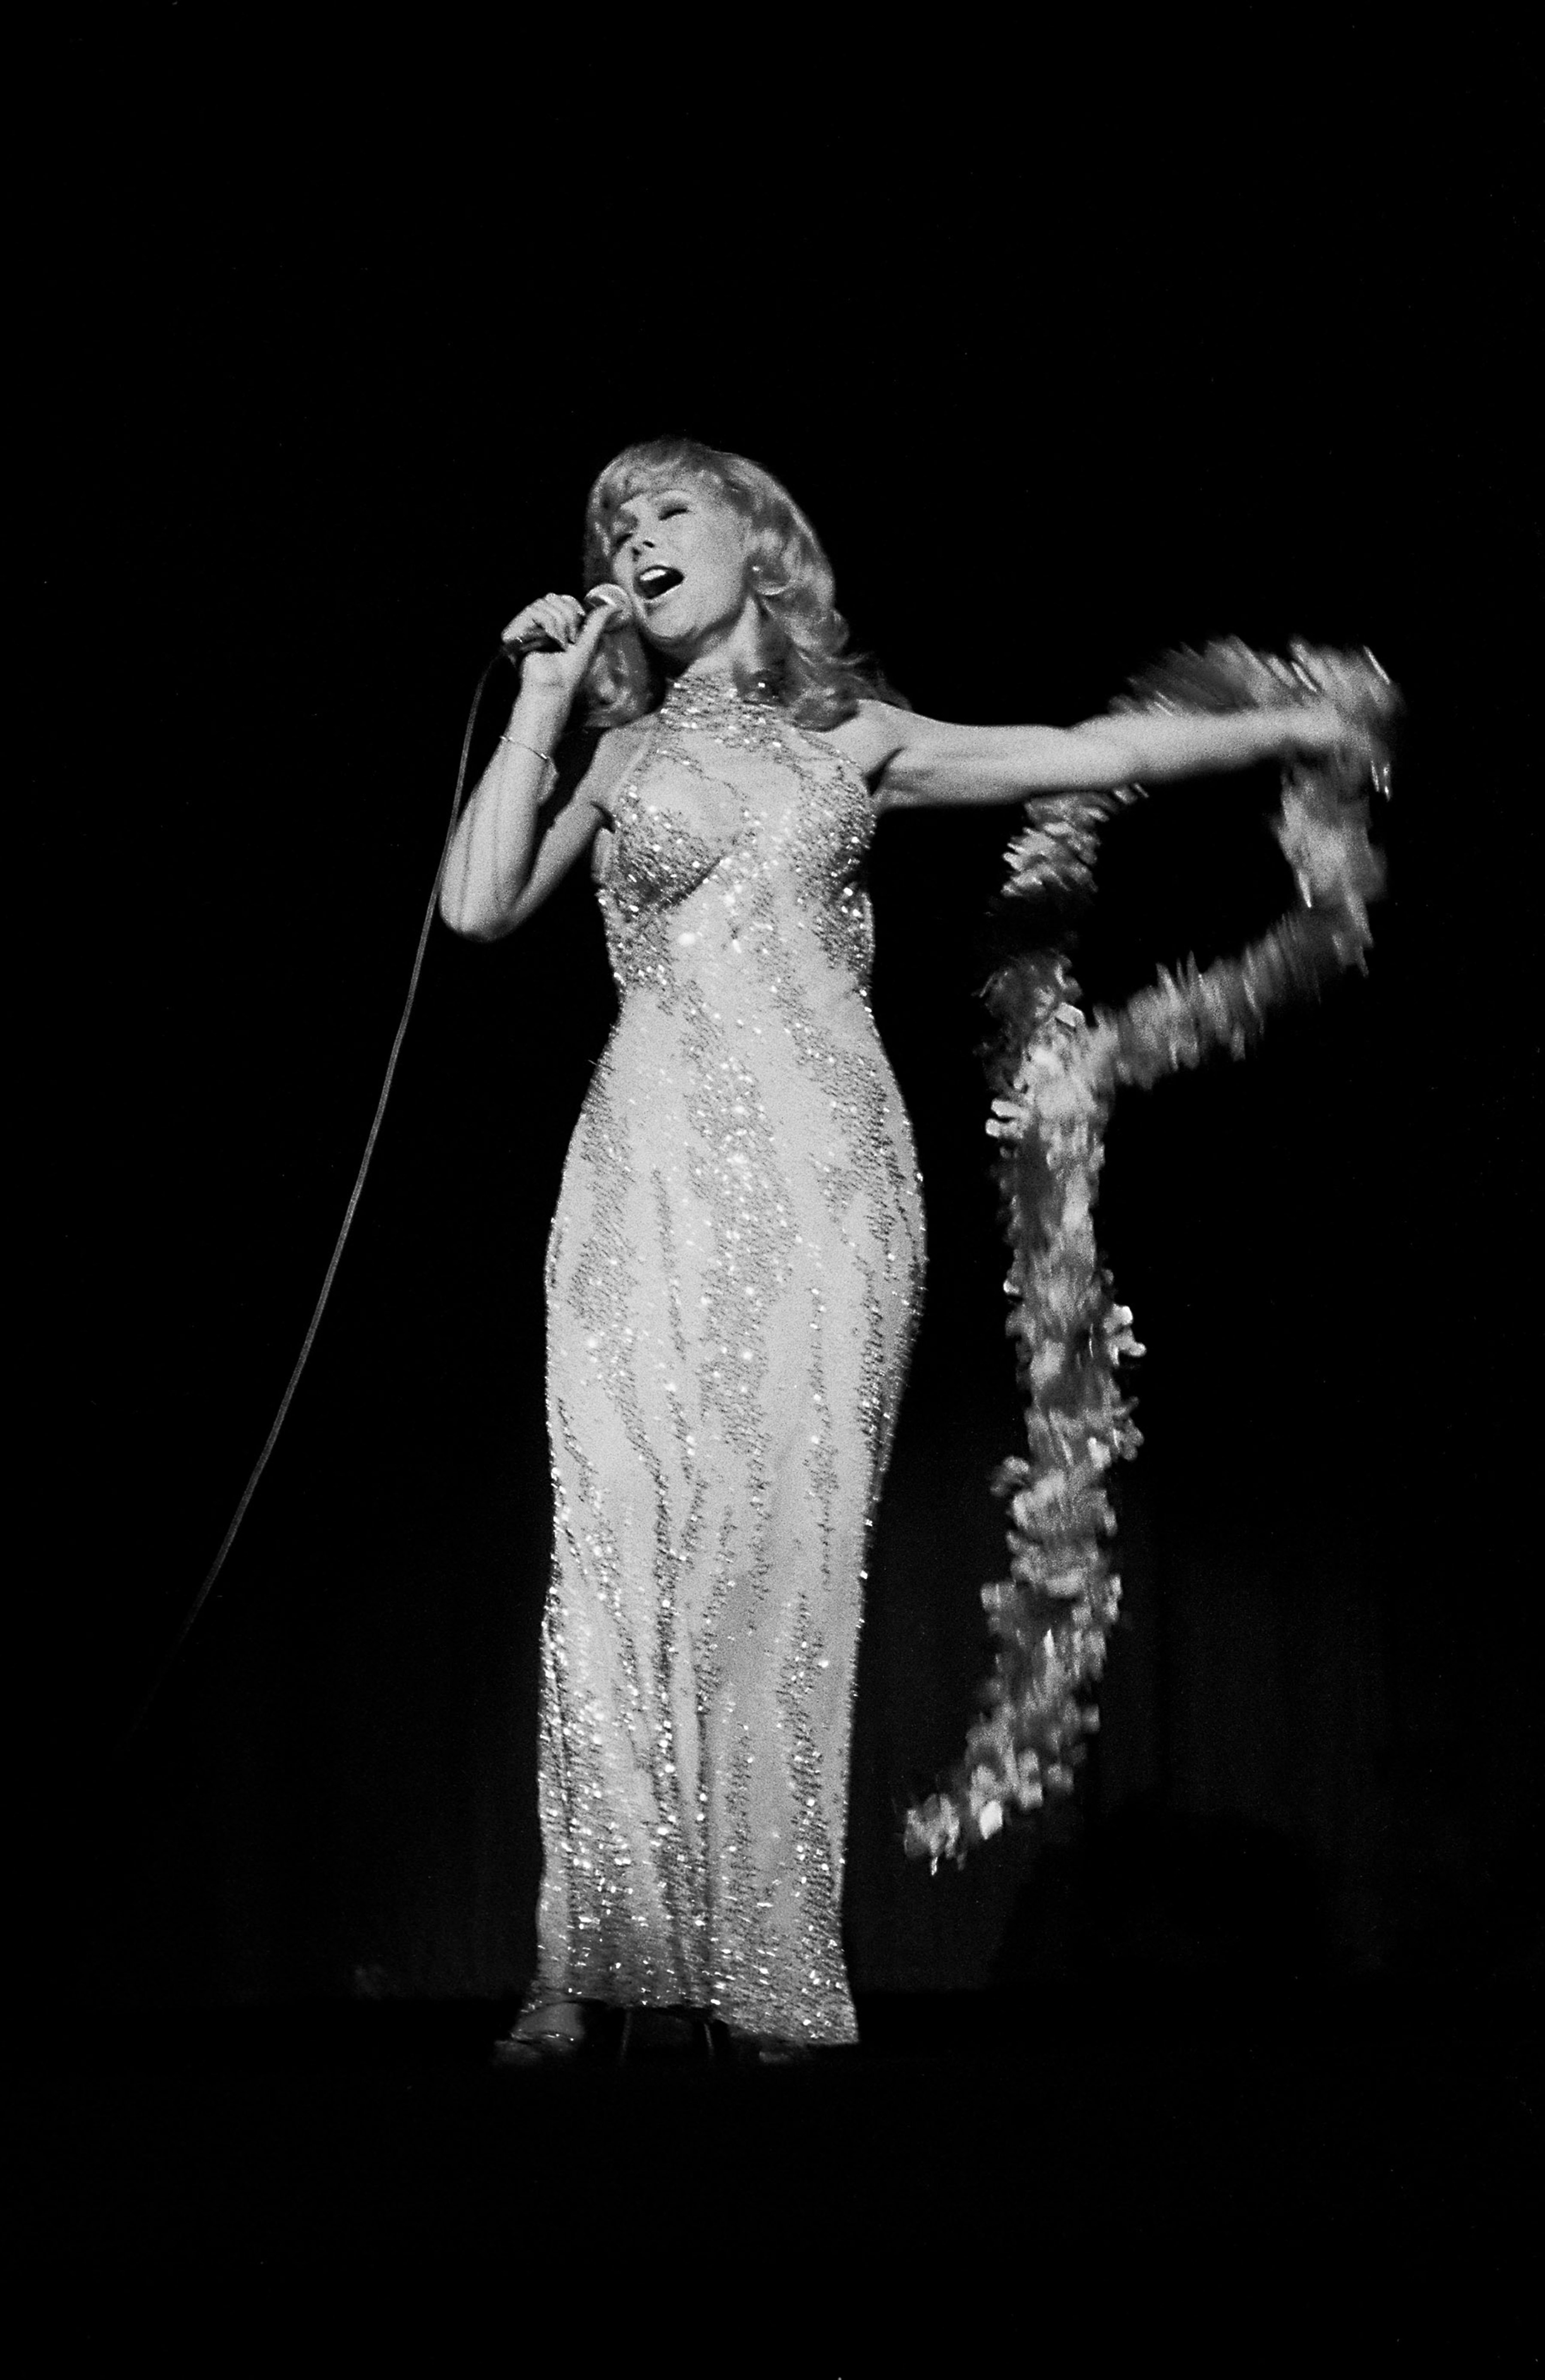 Barbara Eden onstage at Poplar Creek Music Theater, Hoffman Estates, Illinois, August 3, 1980 | Source: Getty Images